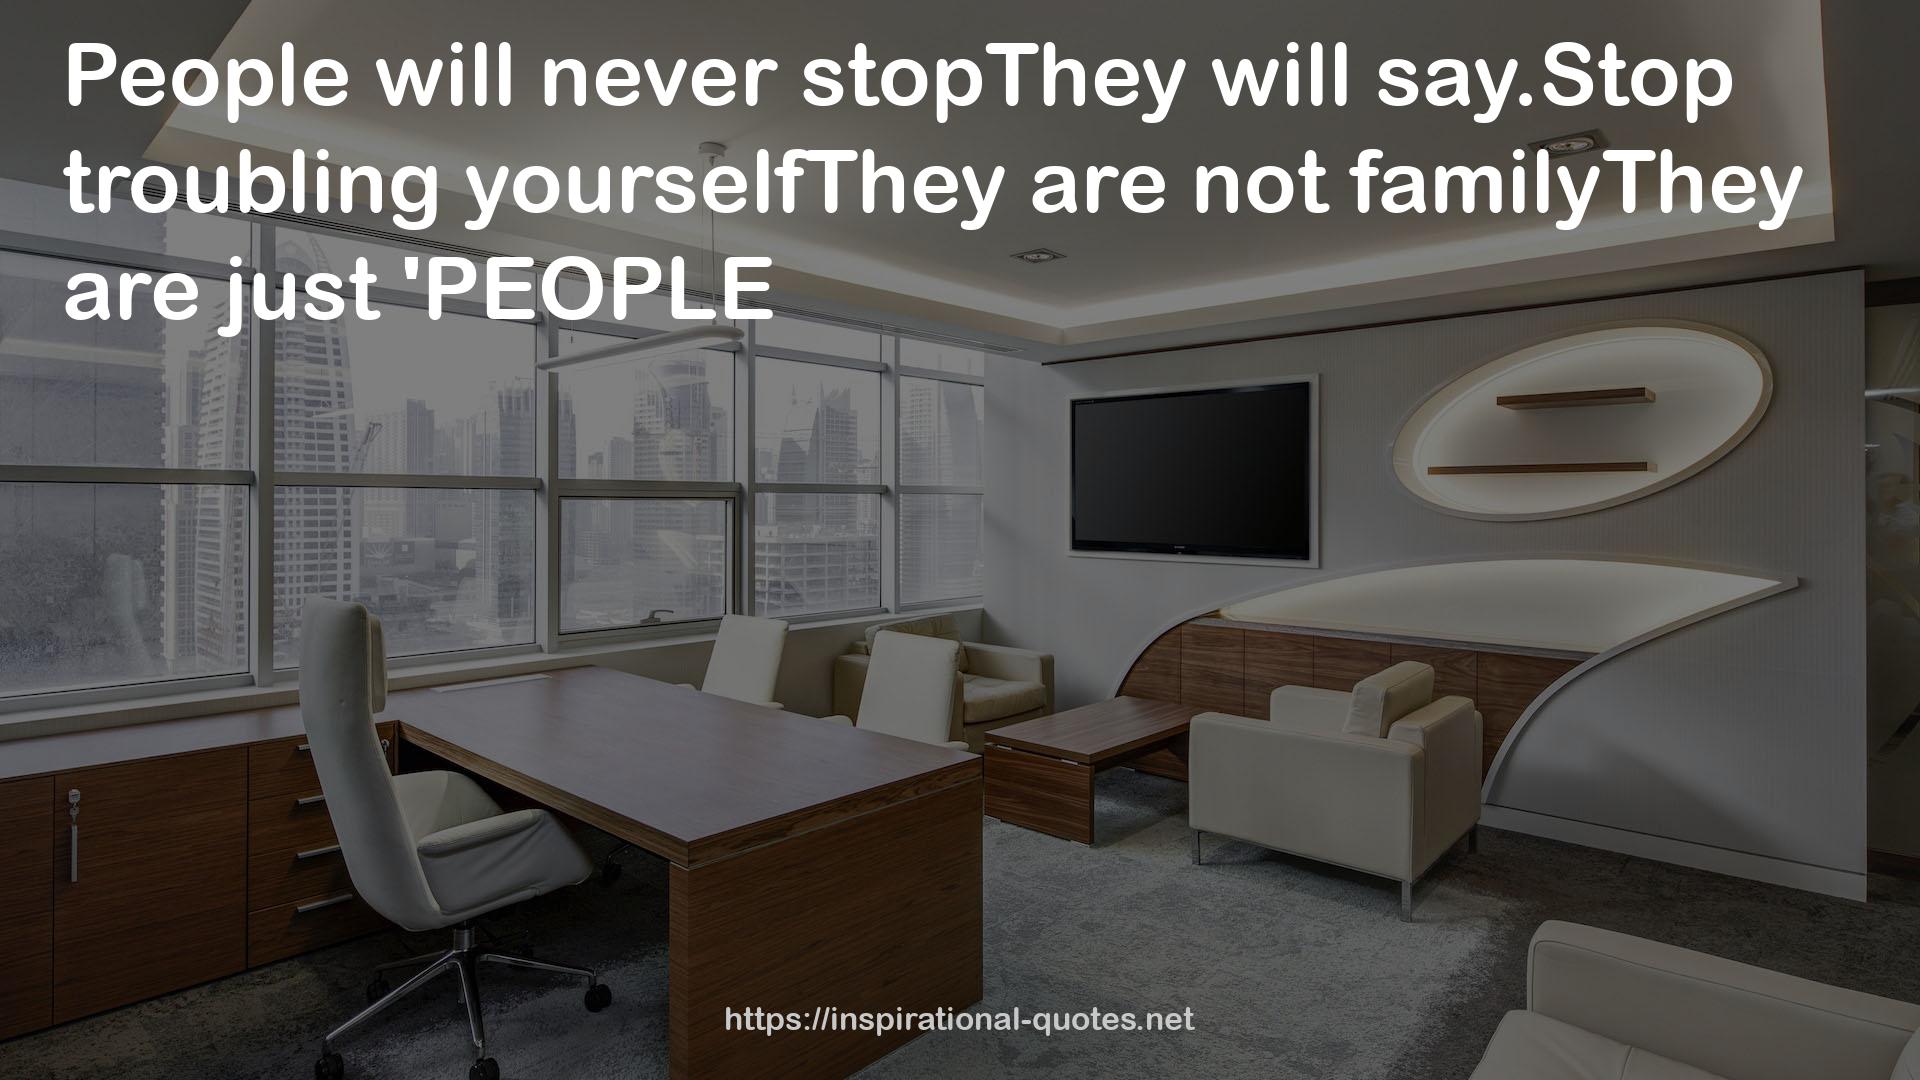 familyThey  QUOTES